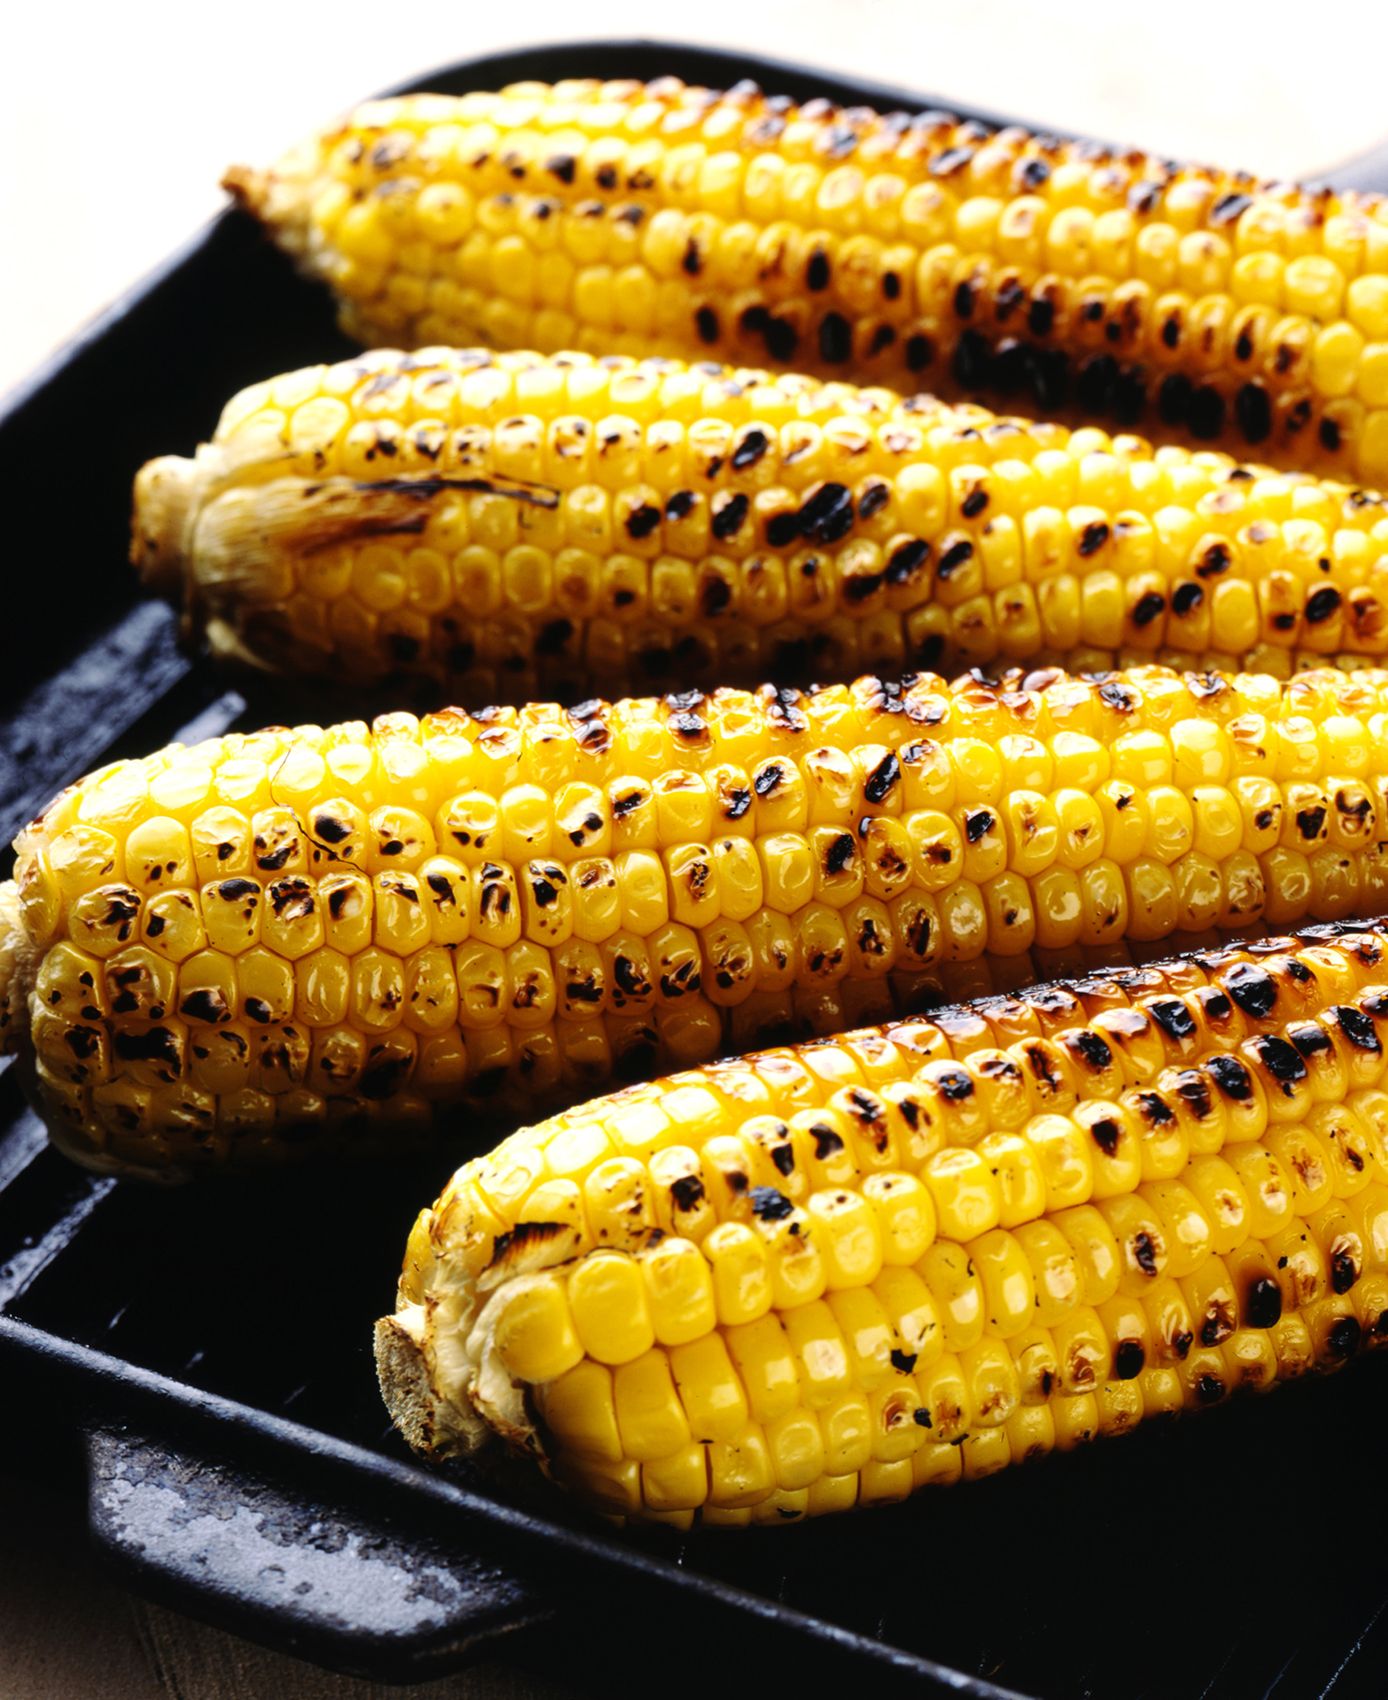 Foolproof Guide for Corn grilling - Plus 6 Creative Toppings